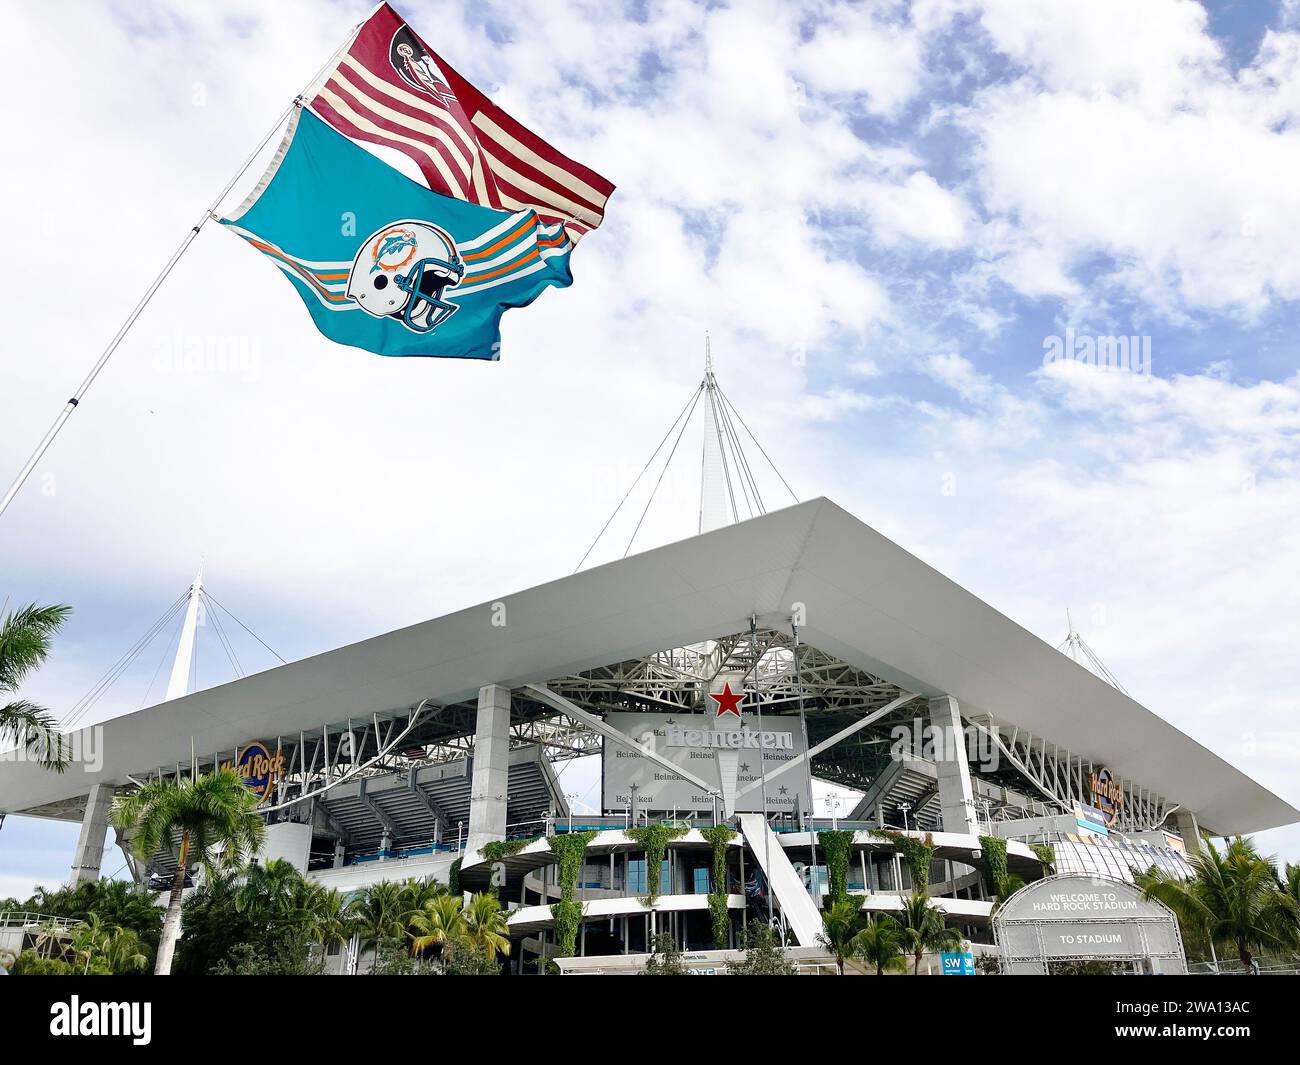 MIAMI, FLORIDA - DECEMBER 30: Team flags for the Miami Dolphins and Florida State Seminoles at the Capital One Orange Bowl football game where the Uni Stock Photo